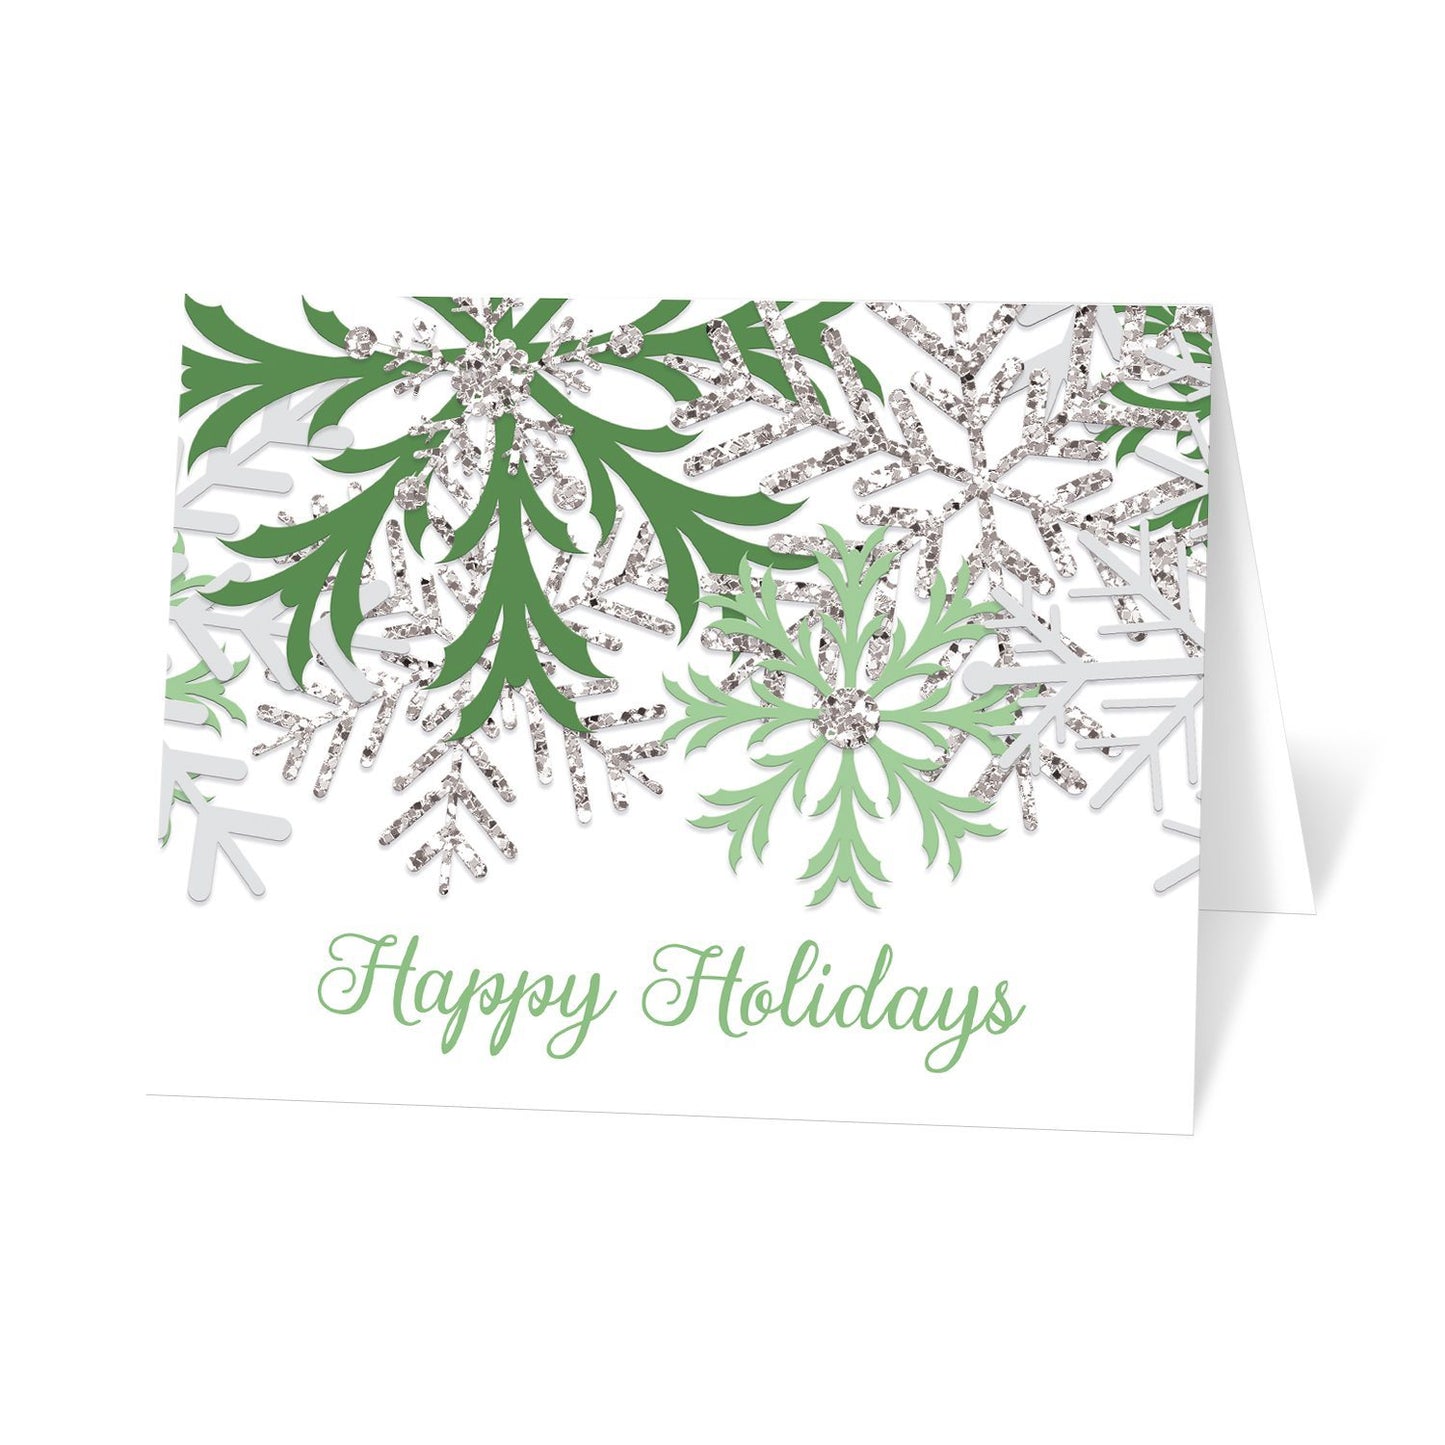 Winter Green Silver Snowflake Holiday Cards at Artistically Invited. Modern Winter green Holiday cards designed with green, light gray, and silver glitter-illustrated snowflakes over a white background. 'Happy Holidays' is printed in a whimsical green script font over the white below the snowflakes. 